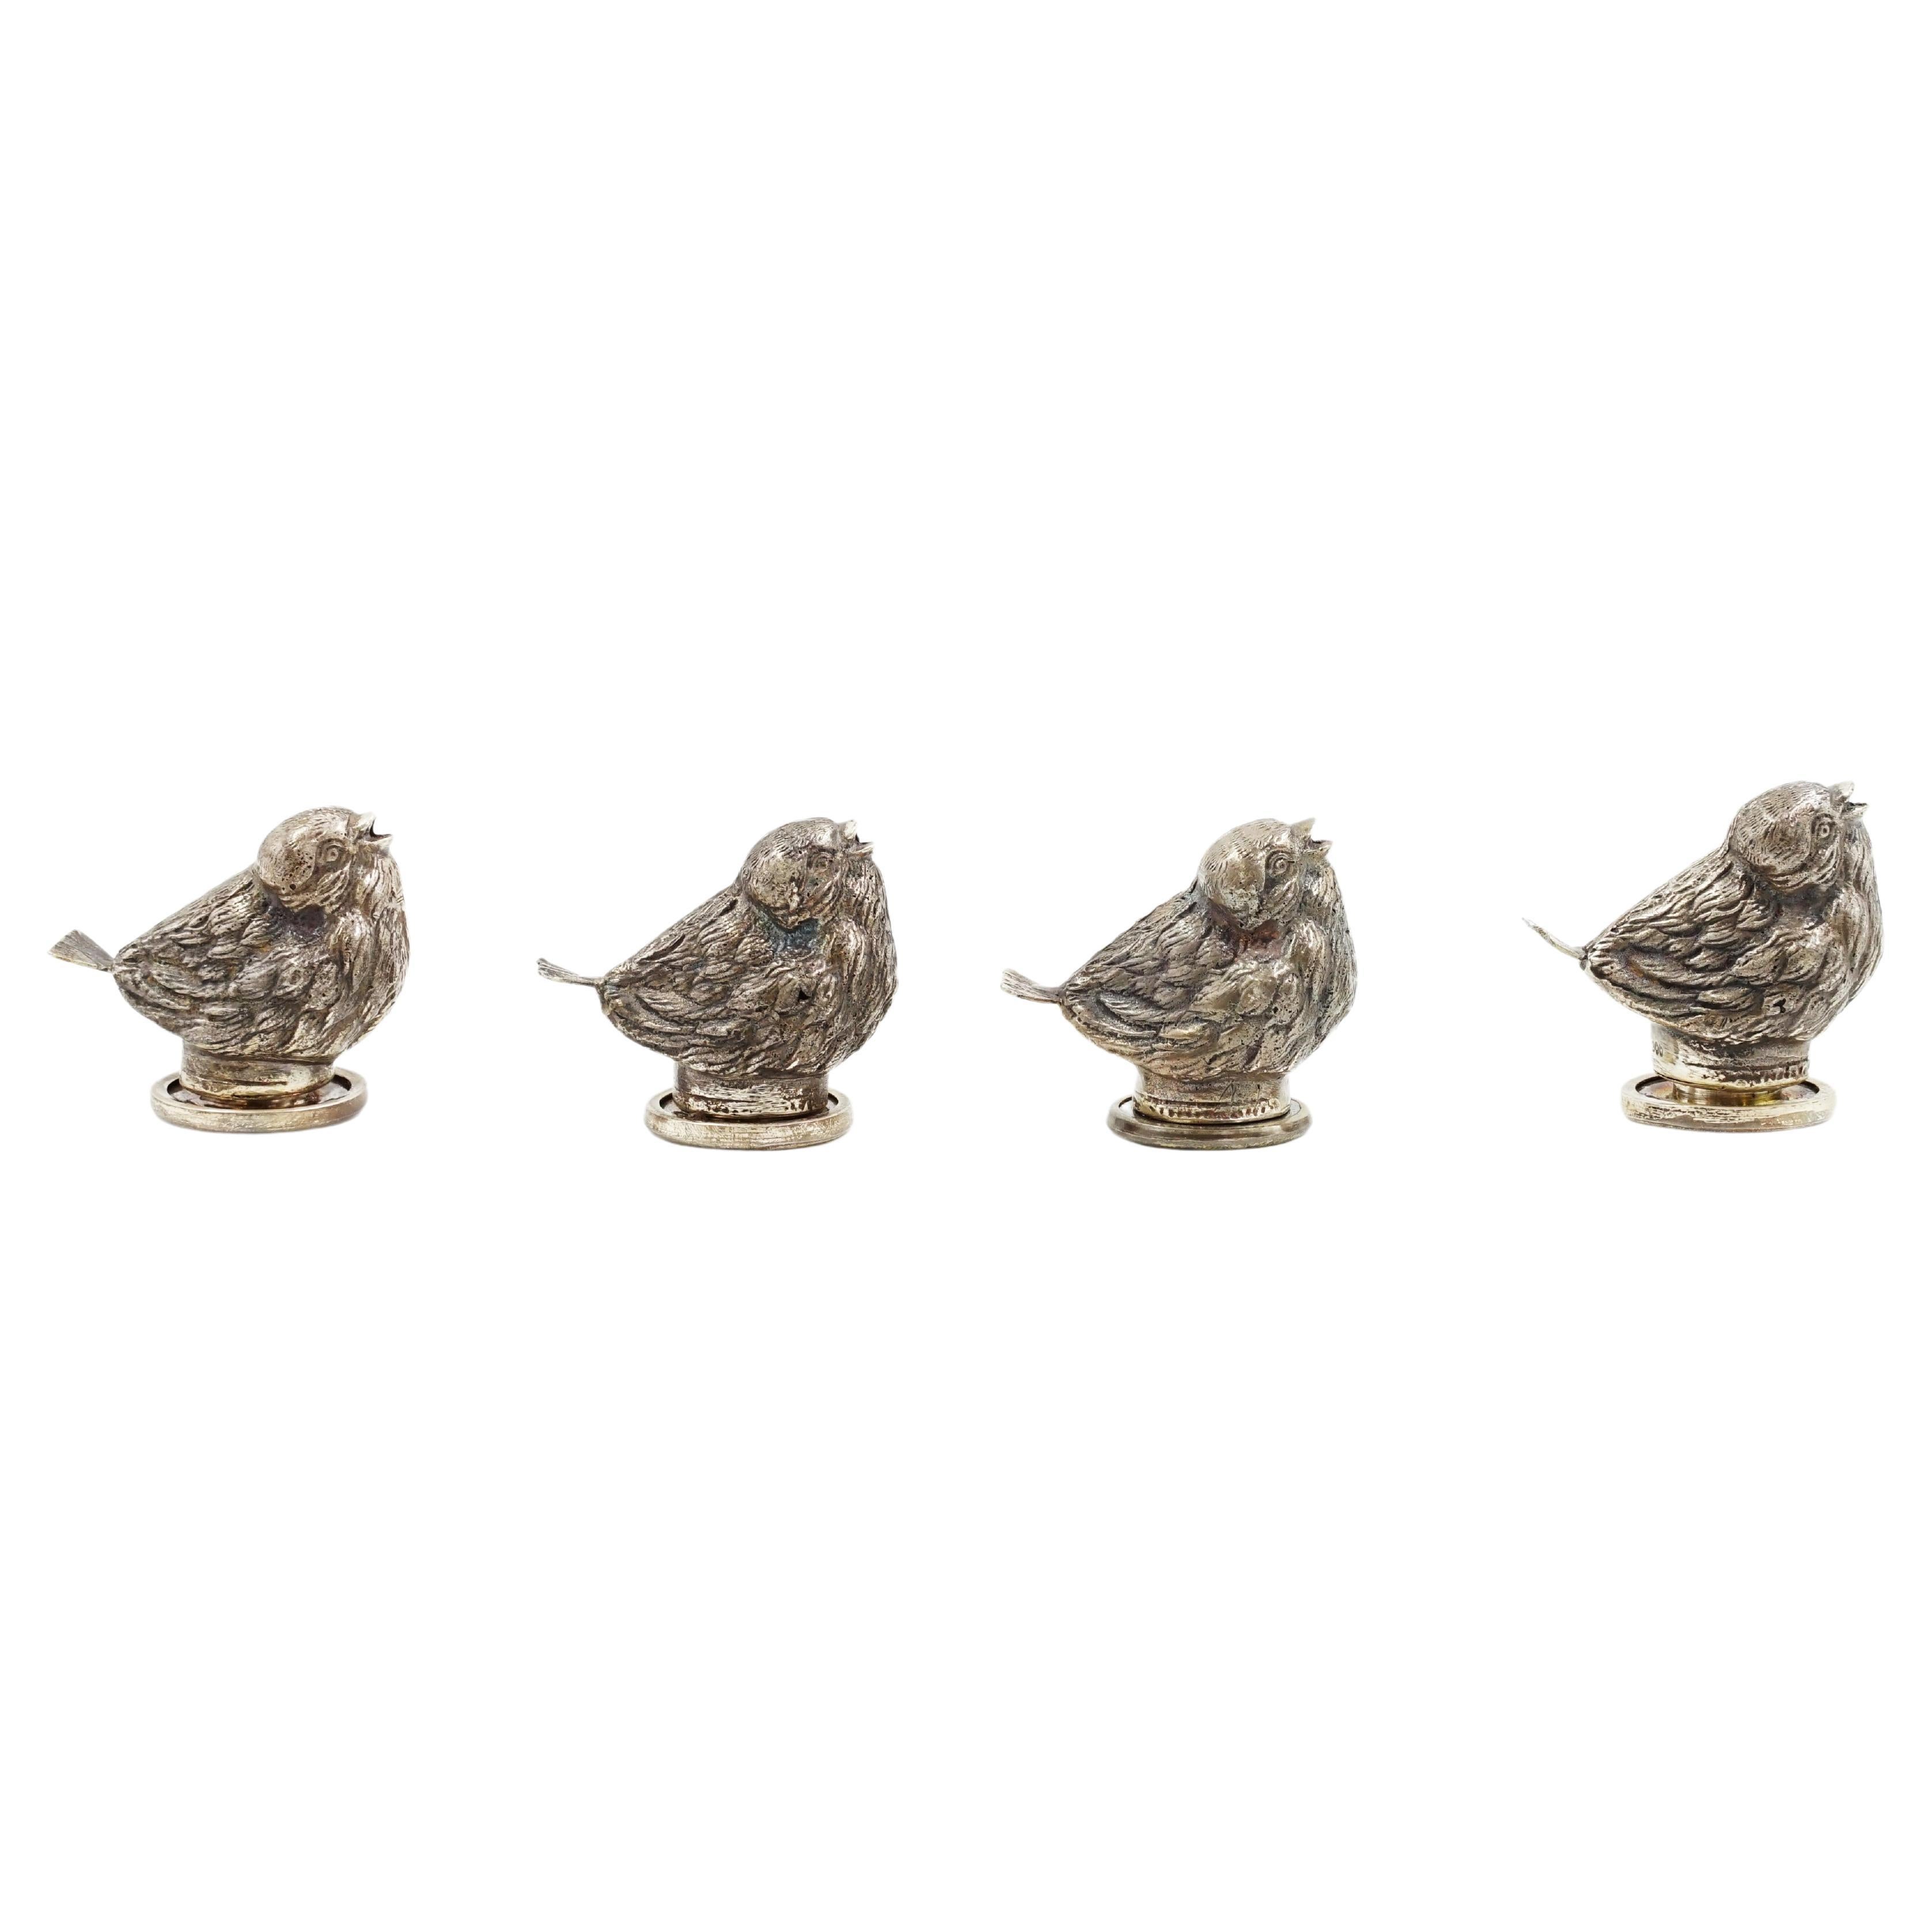 German solid silver salt shakers set
solid silver salt shaker set
Excellent condition and suitable for use
Crica 1940 Origin Germany
solid silver
There are 4 salt shakers shaped like birds. Probably brought from Germany.
Neoclassicism was an